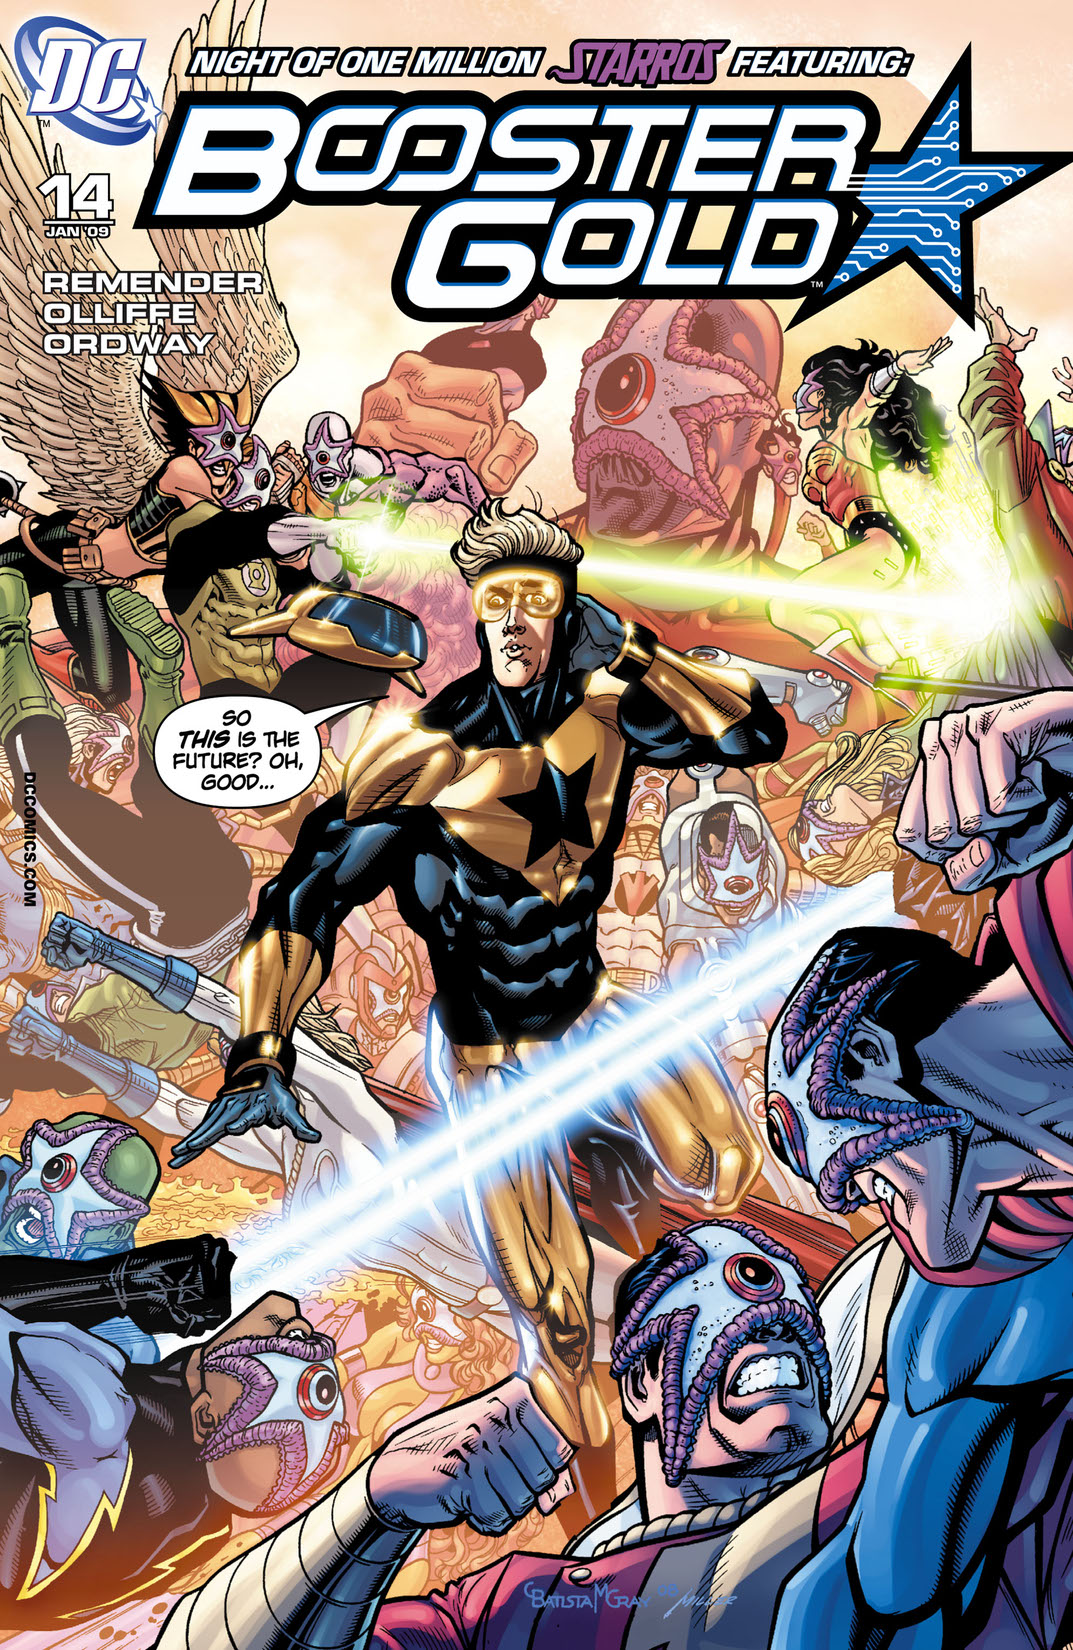 Booster Gold (2007-) #14 preview images